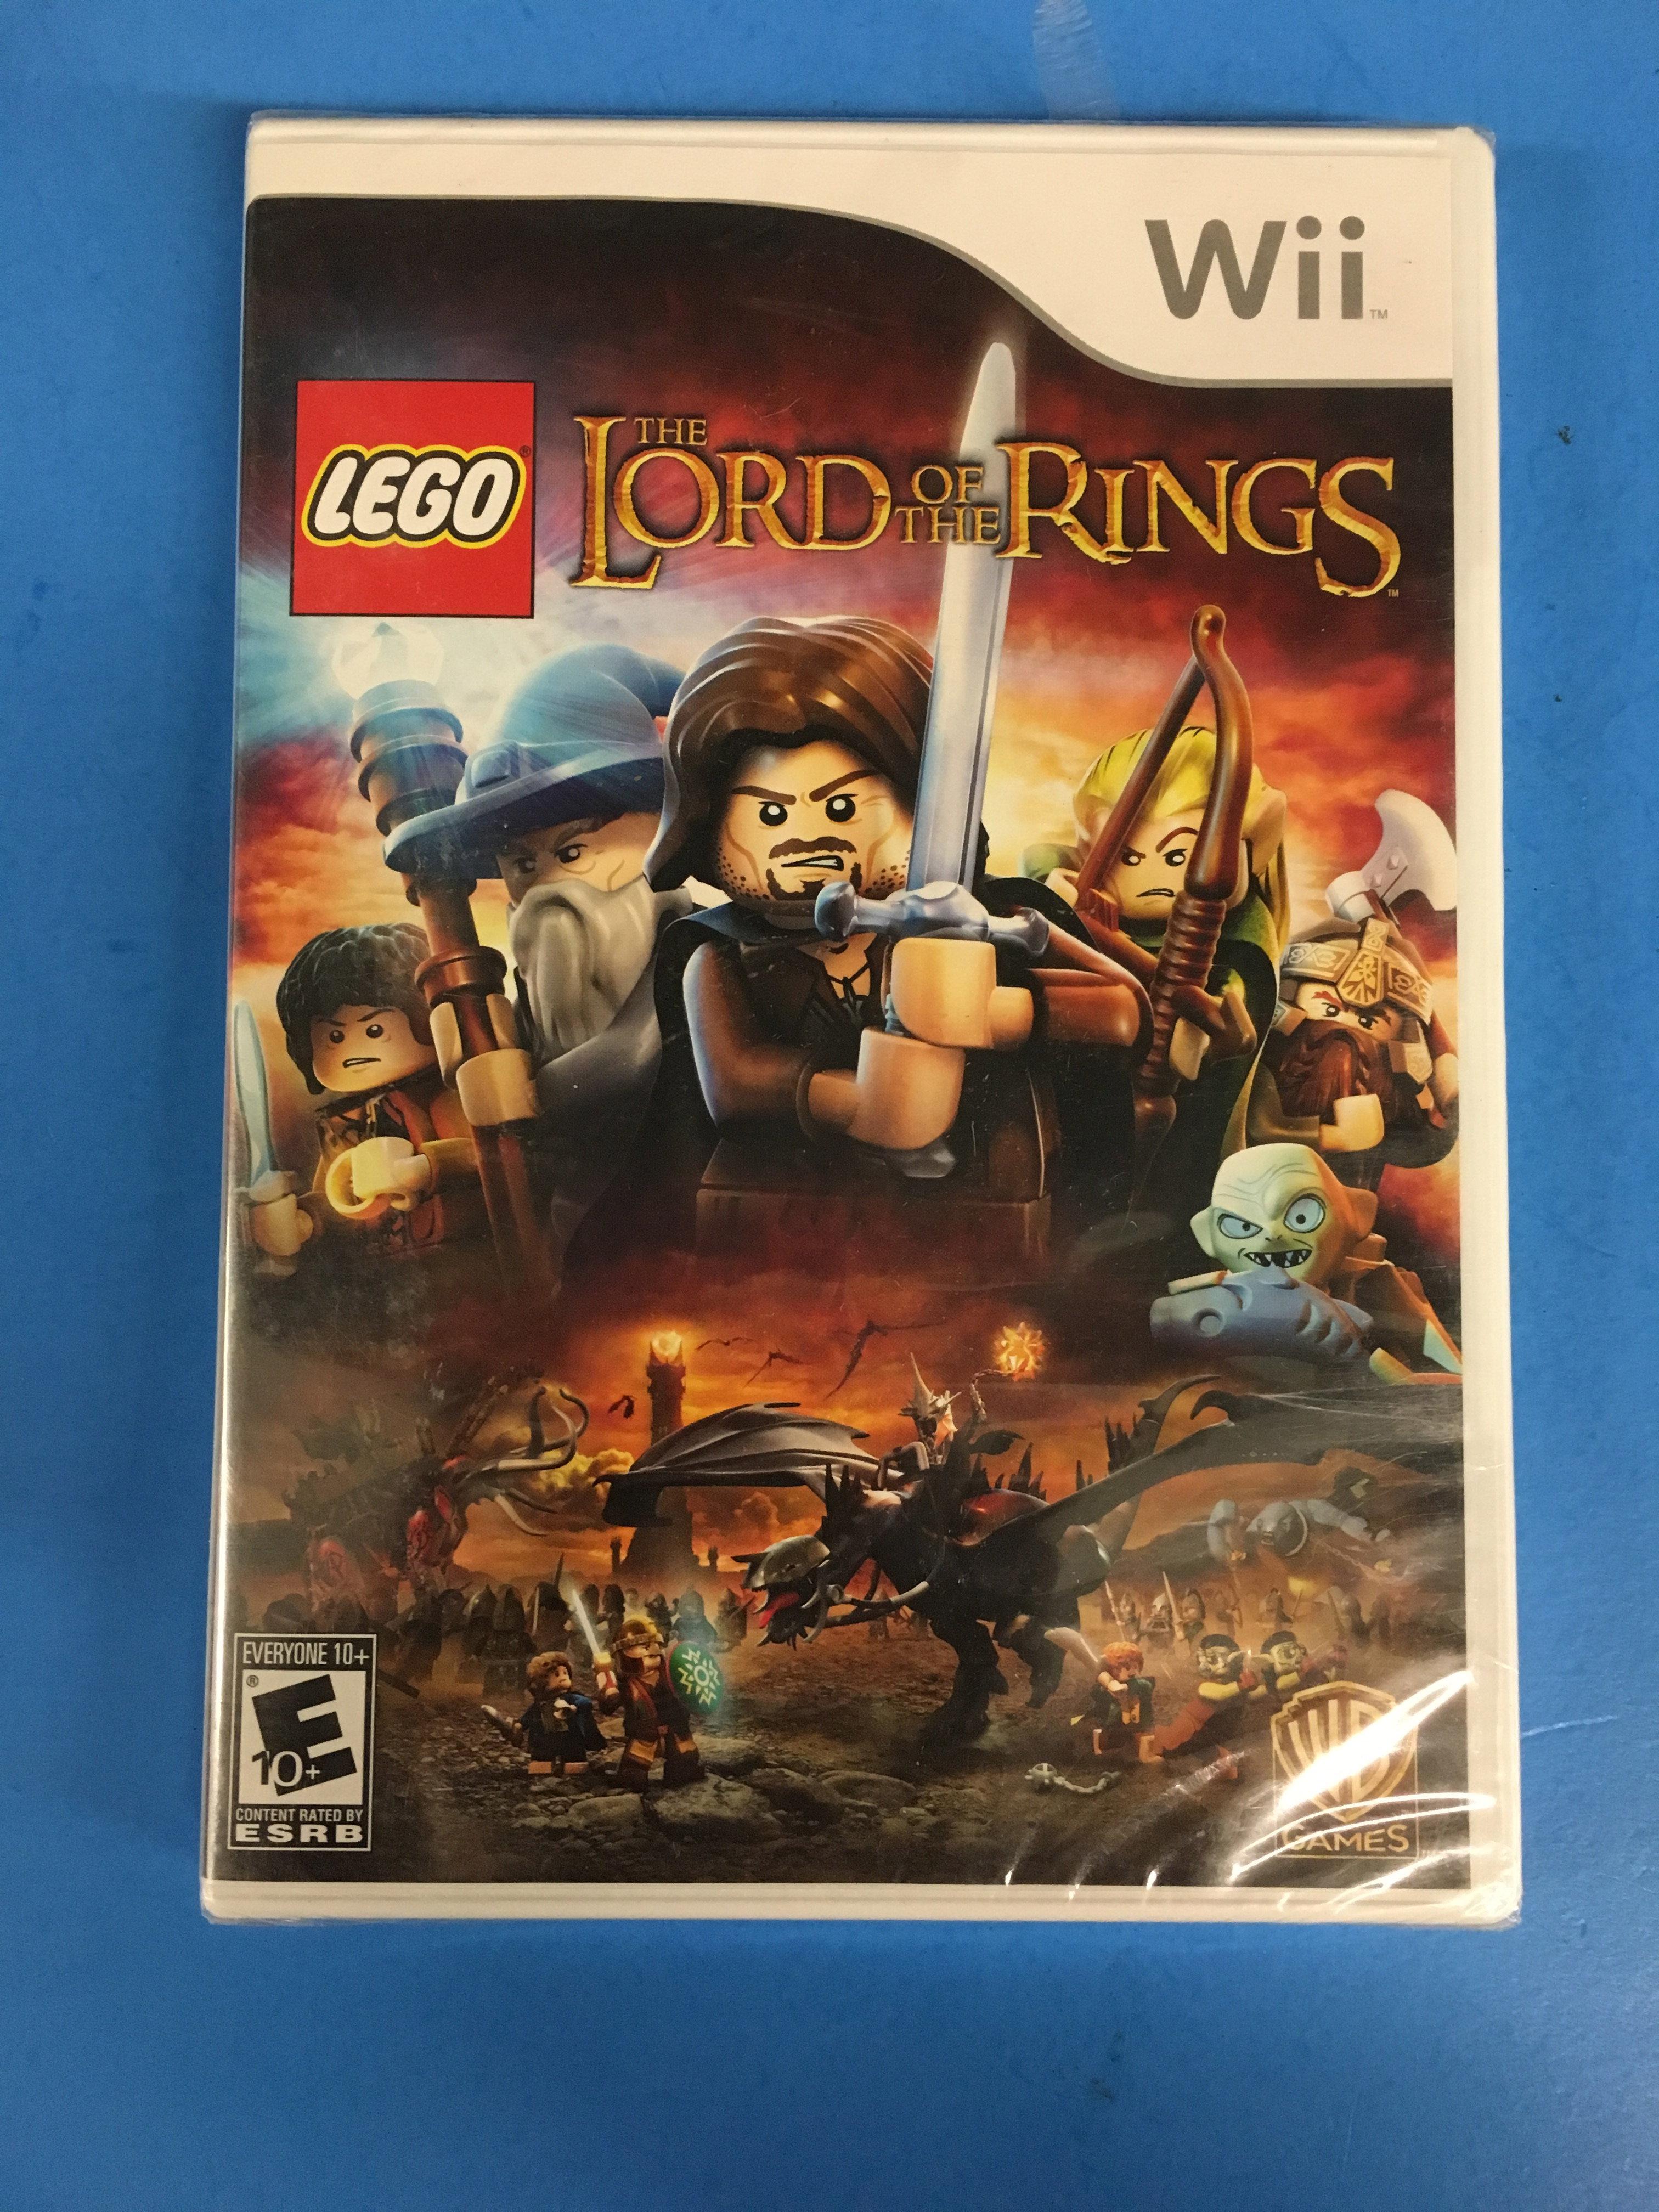 BRAND NEW SEALED Nintendo Wii Lego The Lord of the Rings Video Game